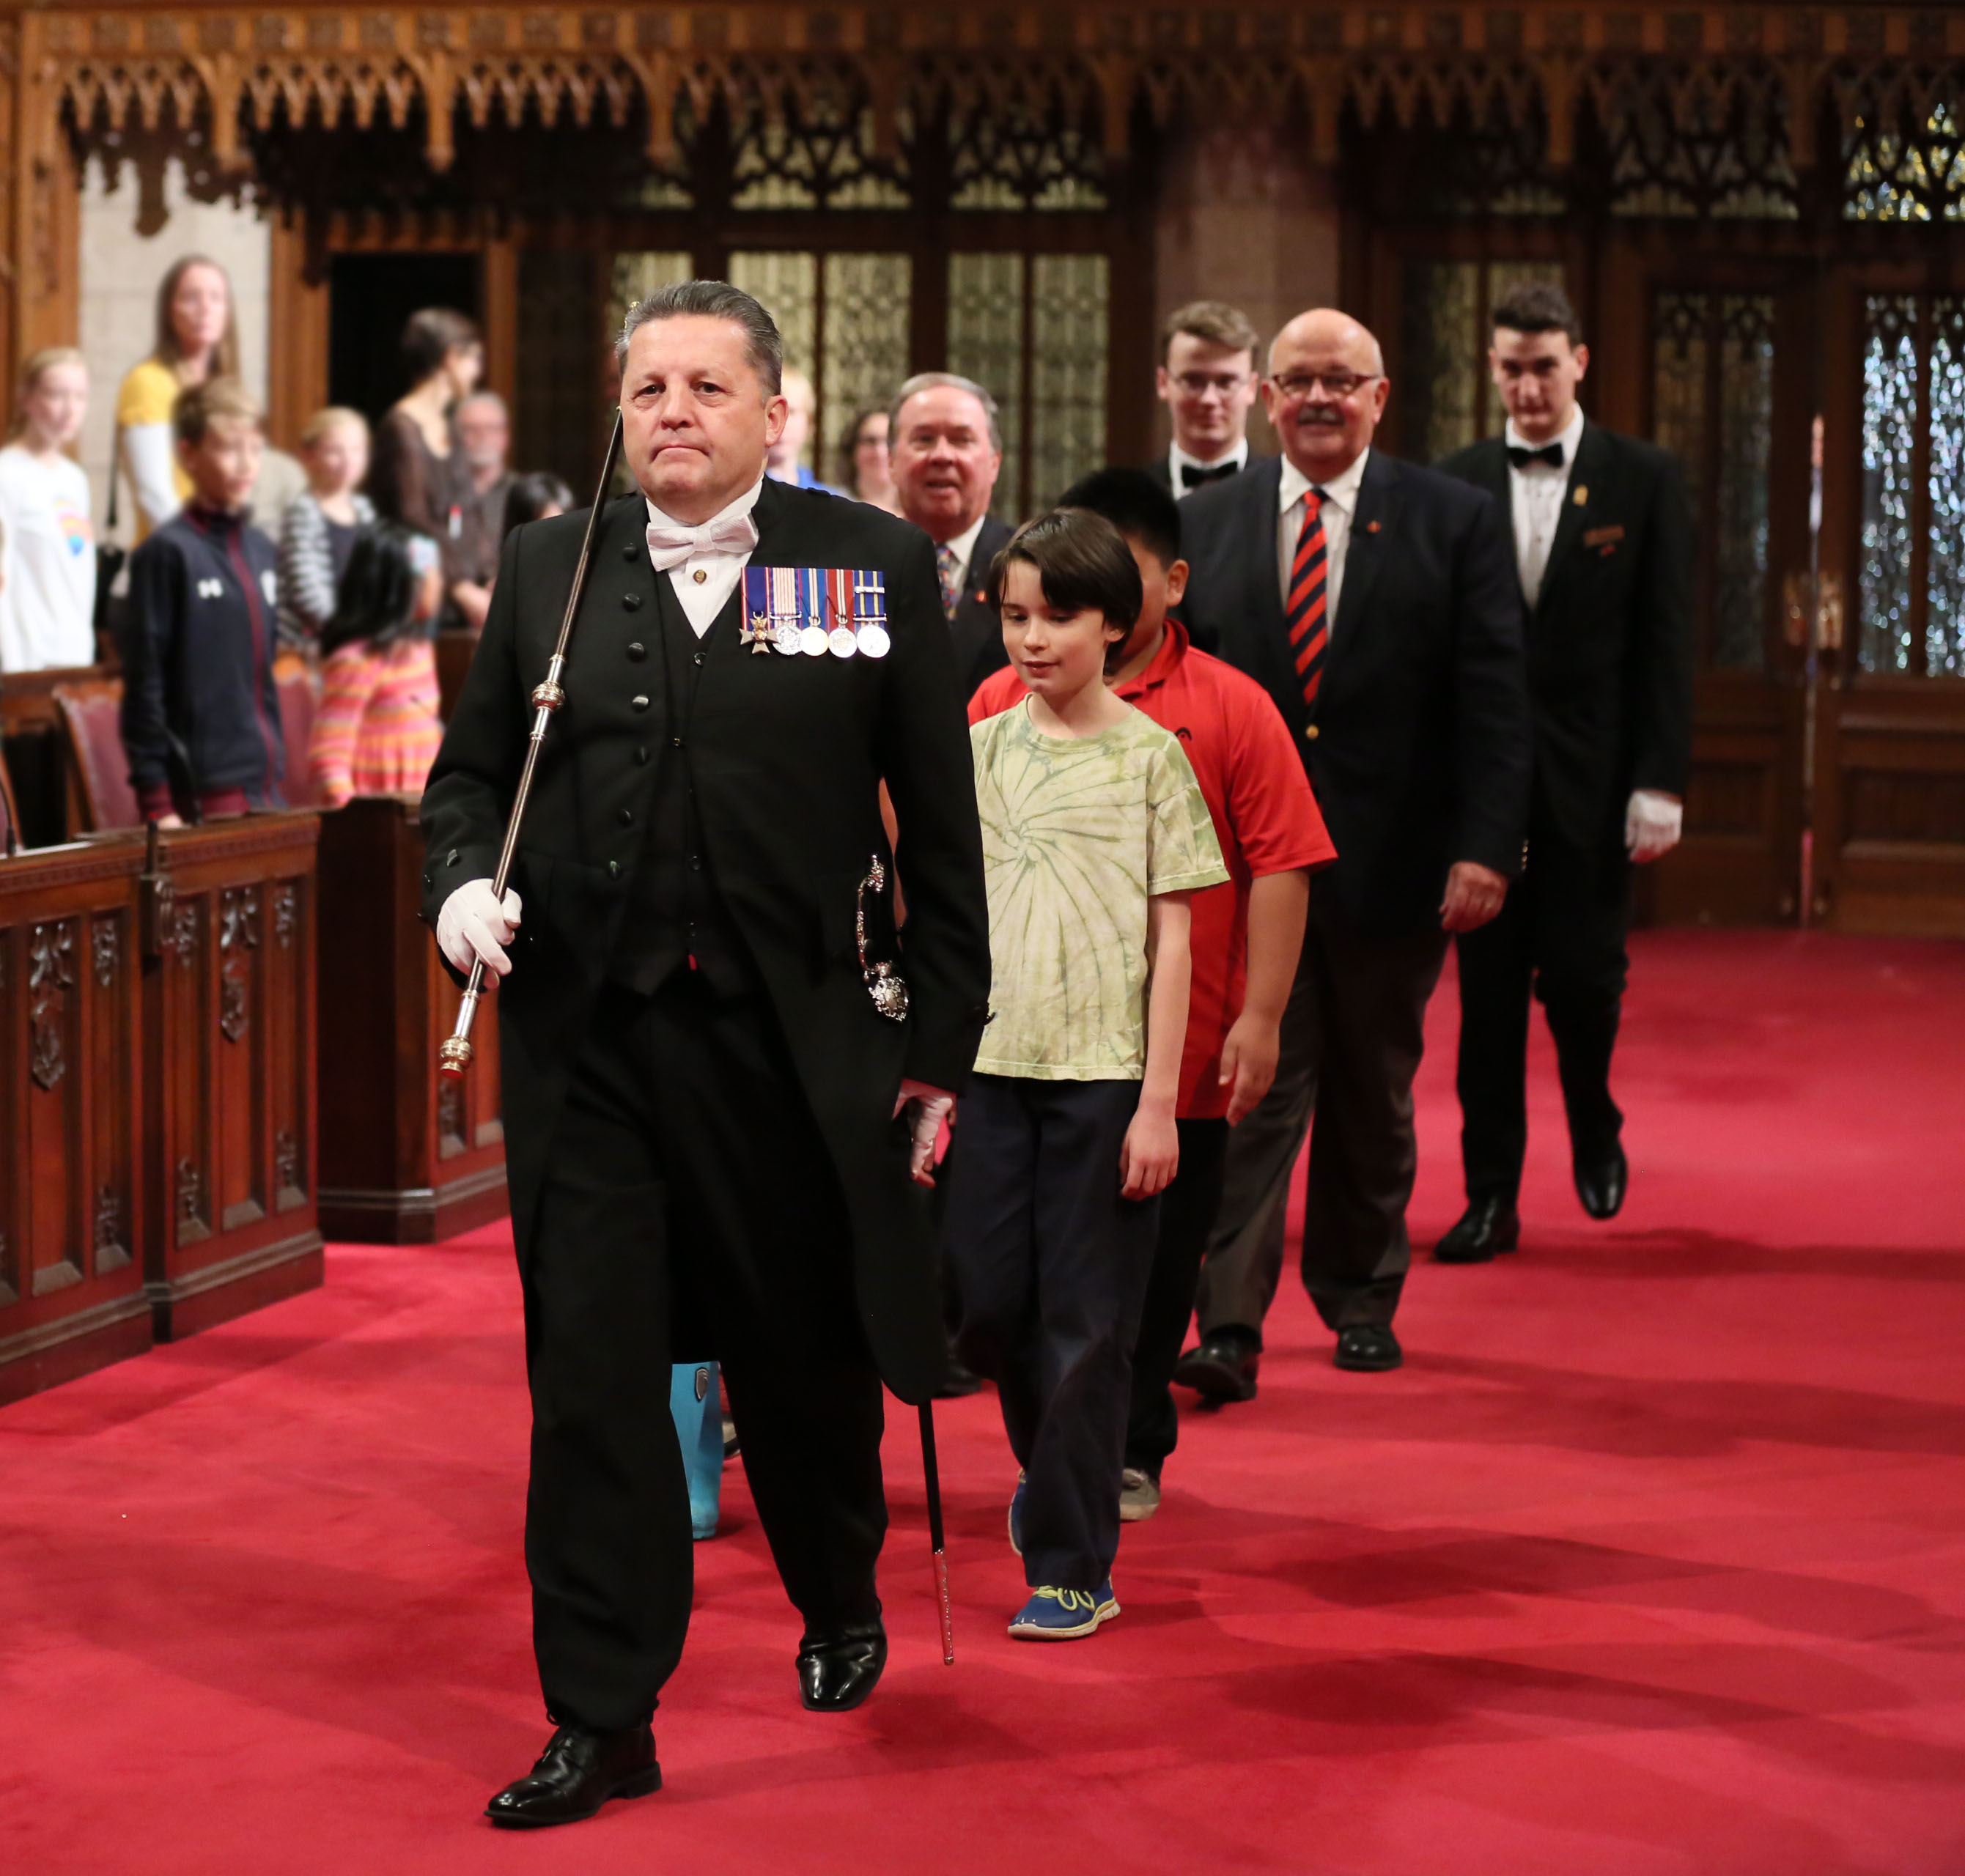 The Usher of the Black Rod leading the parade into the chamber